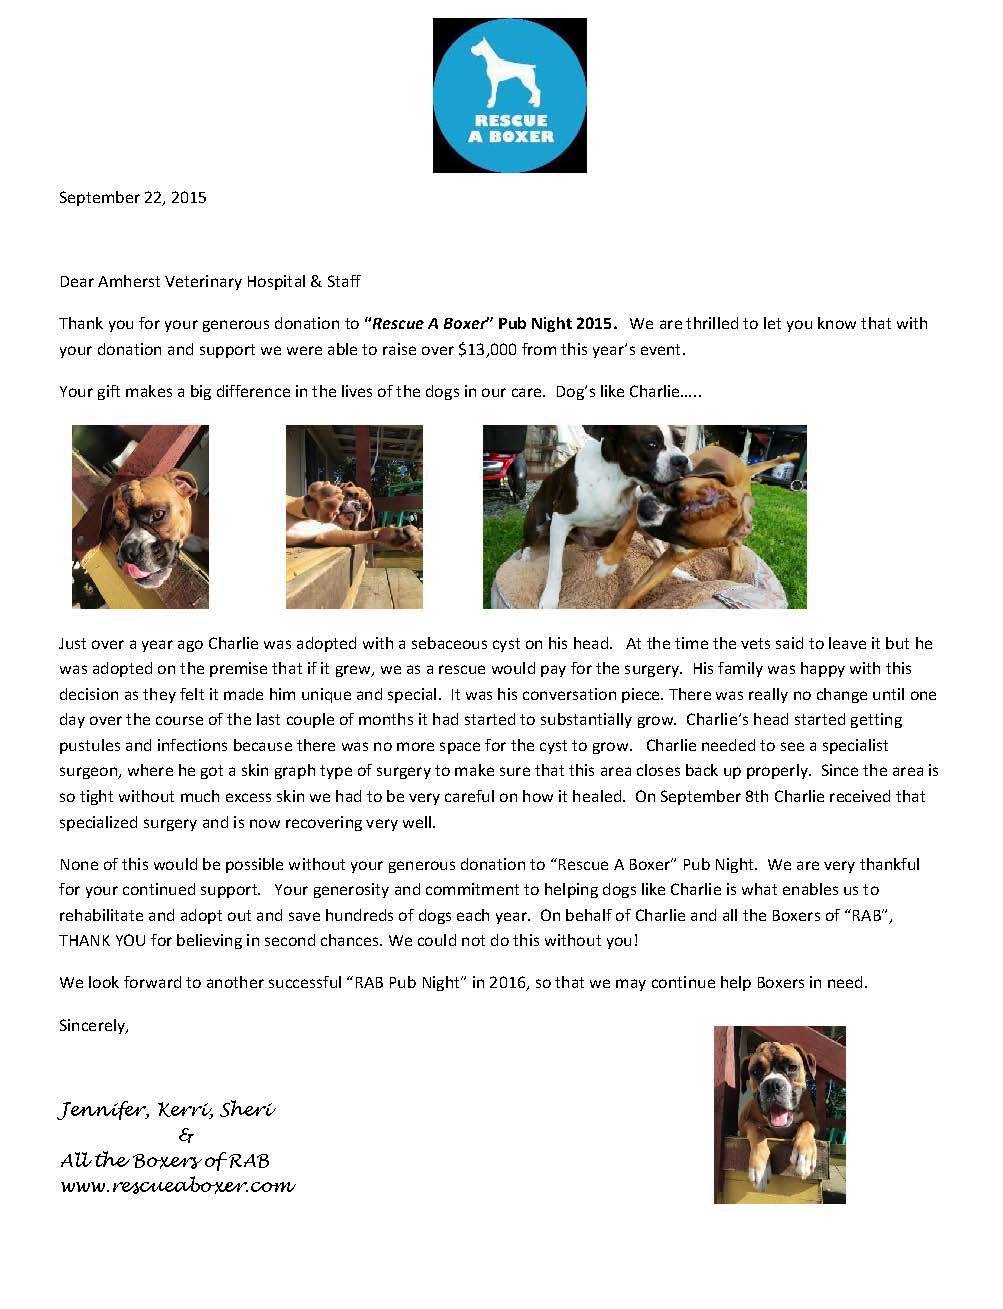 Rescue A Boxer Thank You Letter